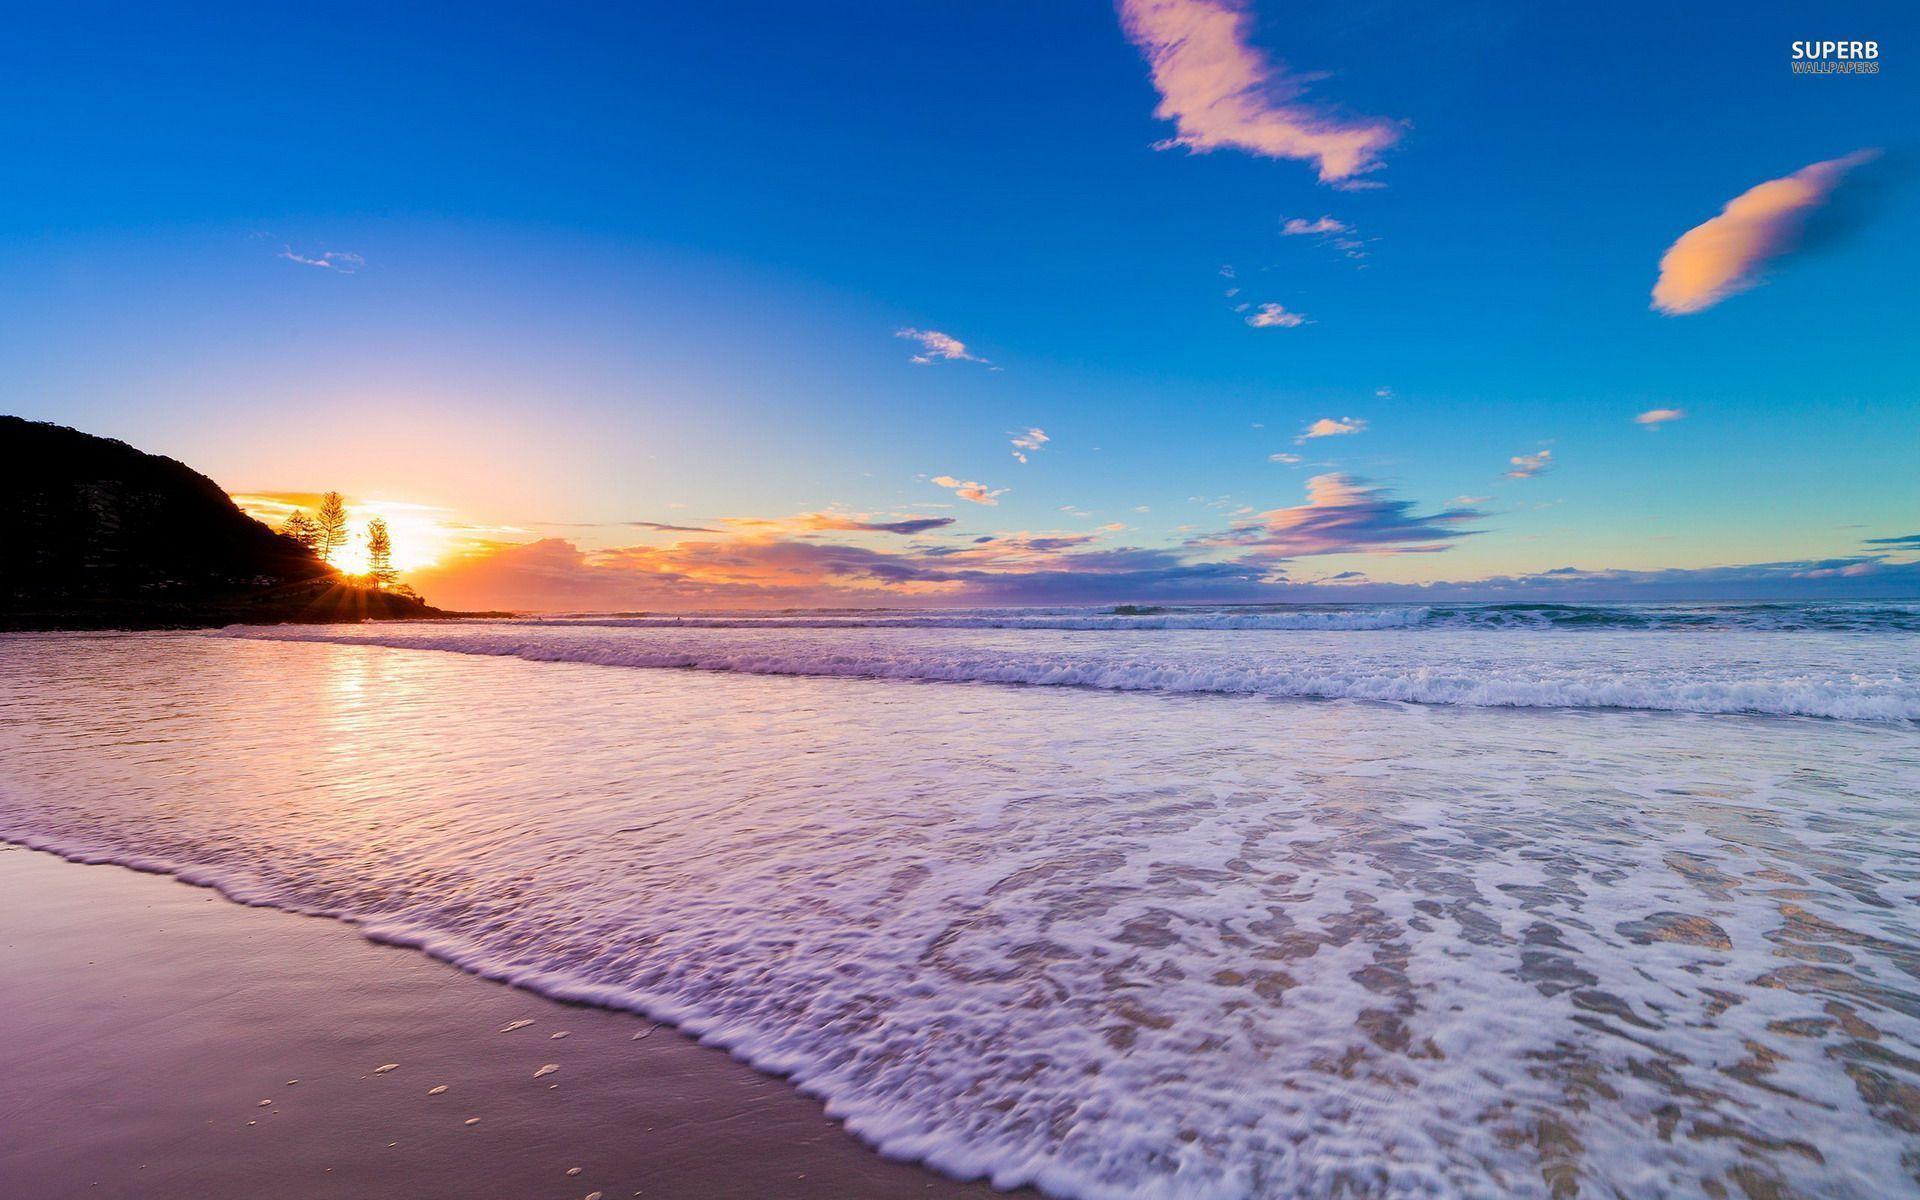 The Beach Sunset 17 HD Image Wallpapers